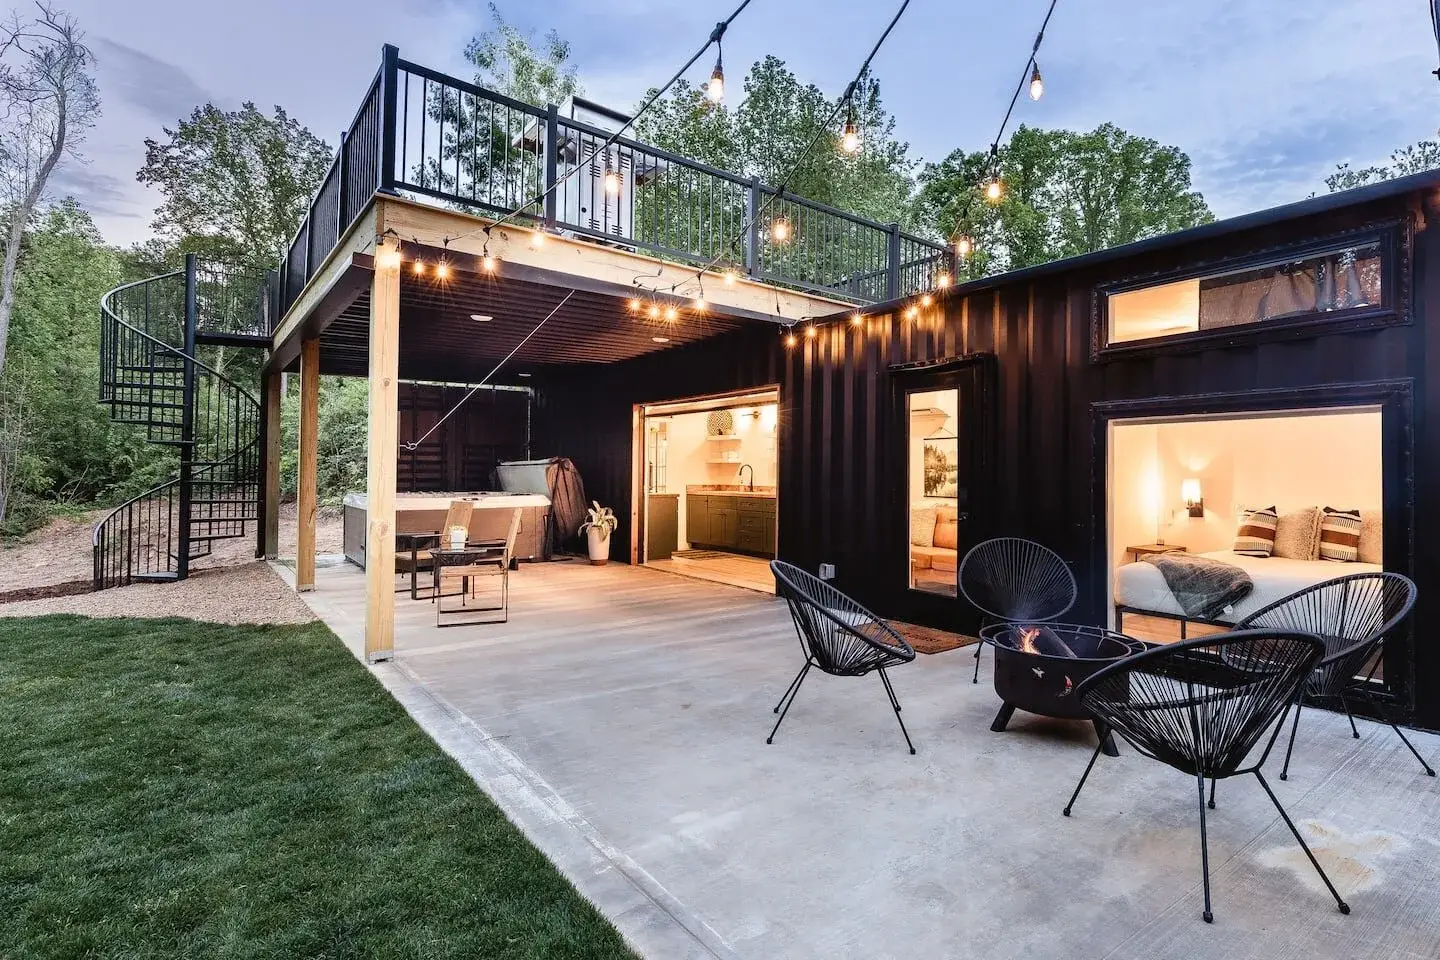 A well decorated container home with hanging aesthetic lights